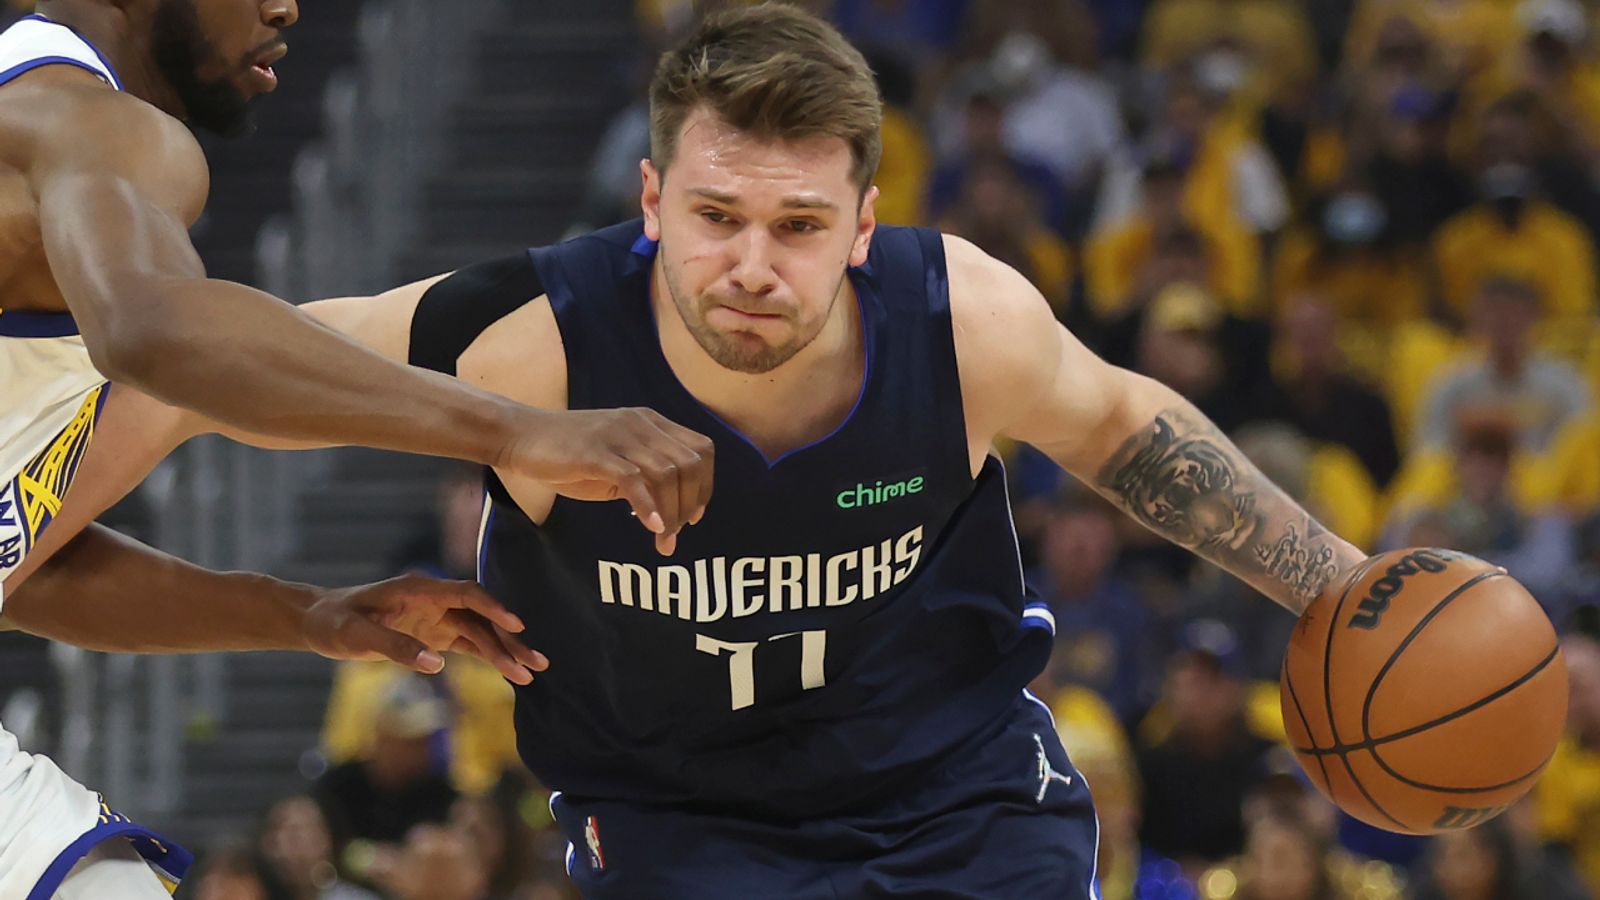 Warriors @ Mavericks: Luka Doncic insists Dallas need to attack the paint more in Game 3